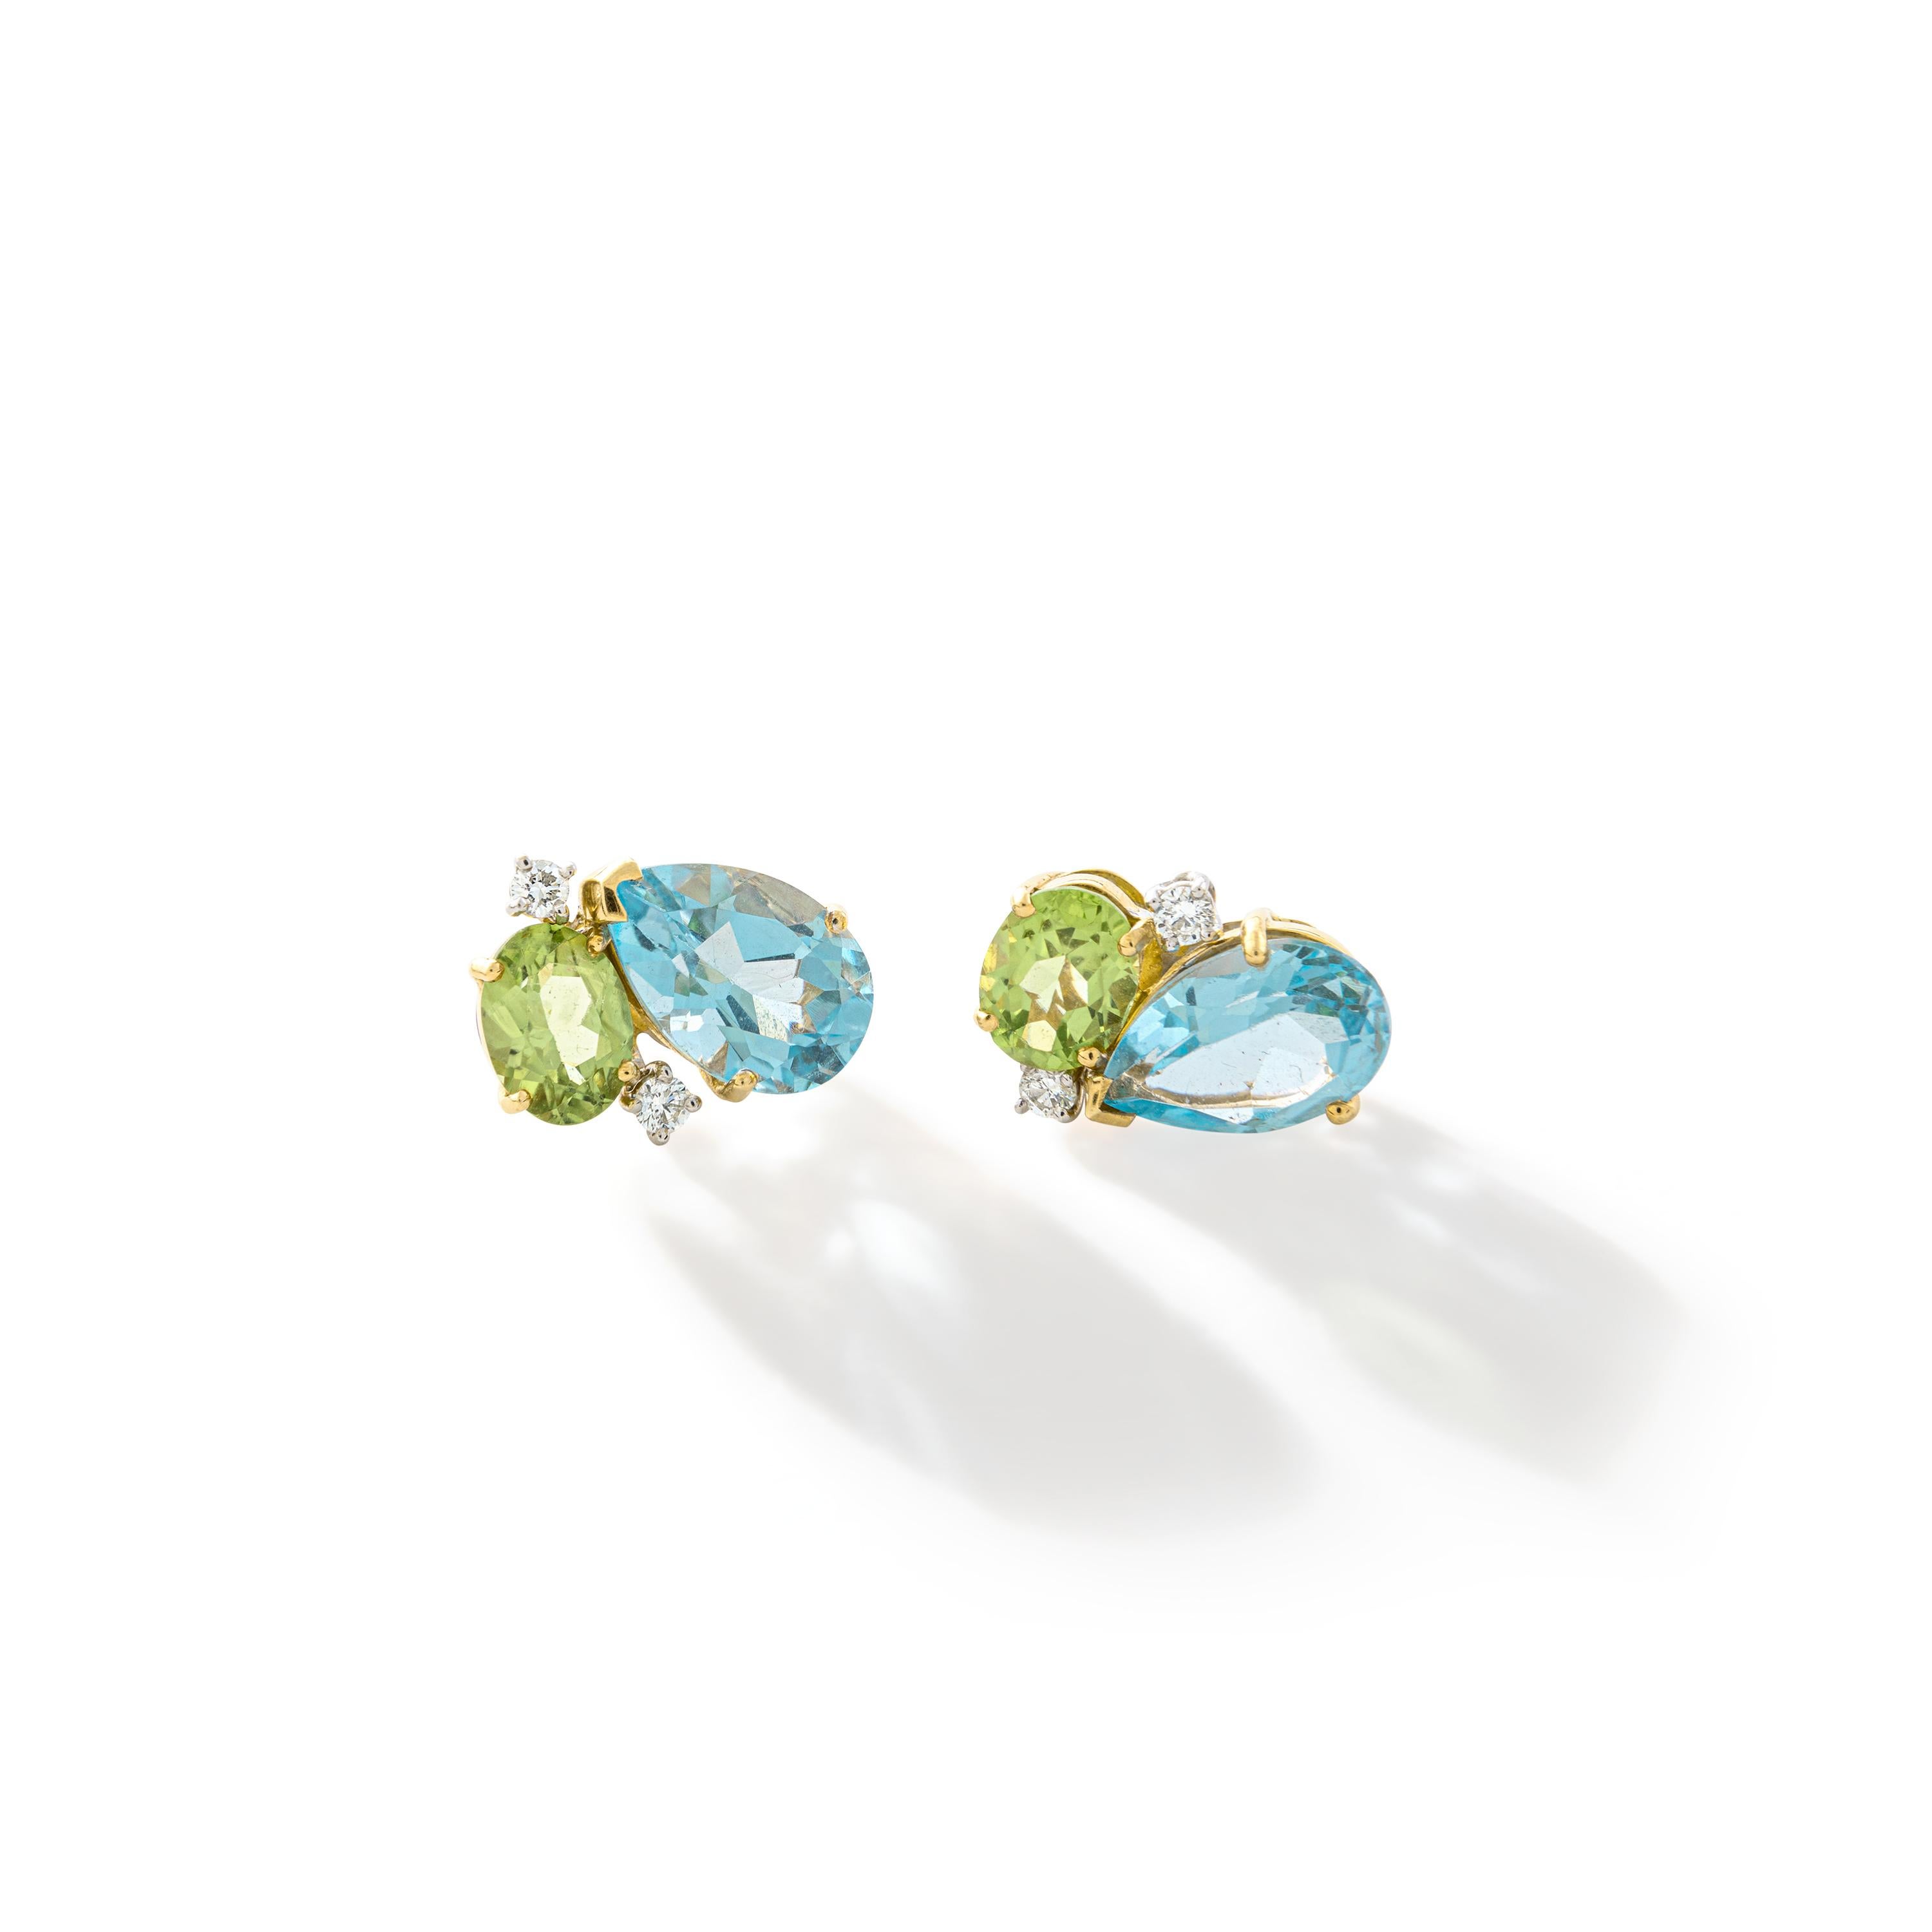 AquaMarine and Peridot, Pear and Oval Shapes on Diamond and Yellow Gold 18k Earrings.
Total height: 0.59 inch (1.50 centimeters).
Total width: 0.59 inch (1.50 centimeters).